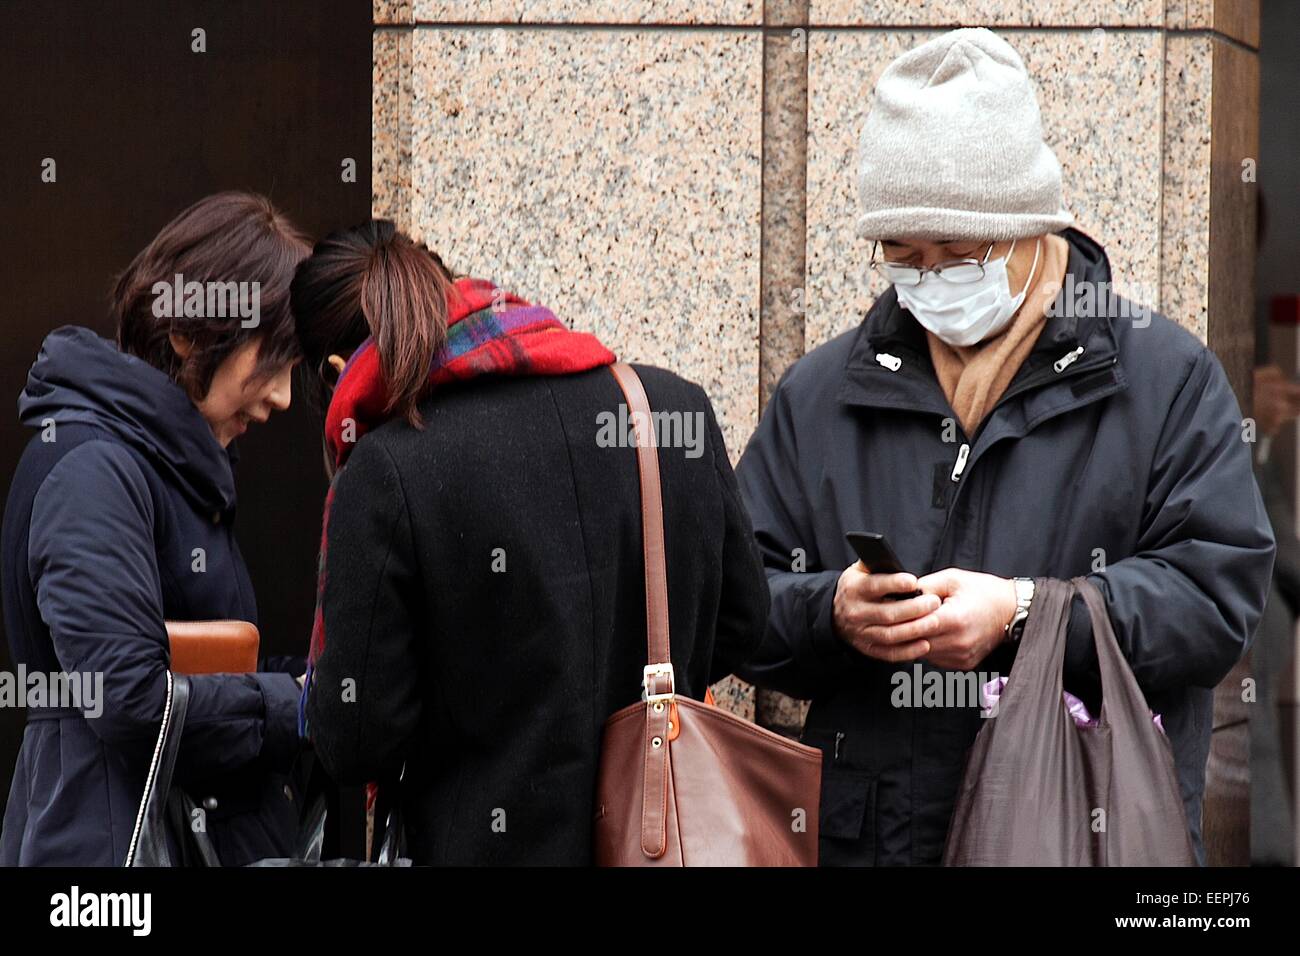 Tokyo, Japan. 17th Feb, 2015. A man uses a flip-phone on the street in Ginza shopping district on February 17, 2015, Tokyo, Japan. According to data from MM Research Institute Flip-phones sales increased for first time in seven years in Japan in 2014. In Japan flip-phones monthly rates are cheaper in comparison to smartphones which are more expensive than in other countries. Flip-phones sales rose 5.7% in 2014 whilst smartphone sales declined 5.3%. Credit:  Rodrigo Reyes Marin/AFLO/Alamy Live News Stock Photo